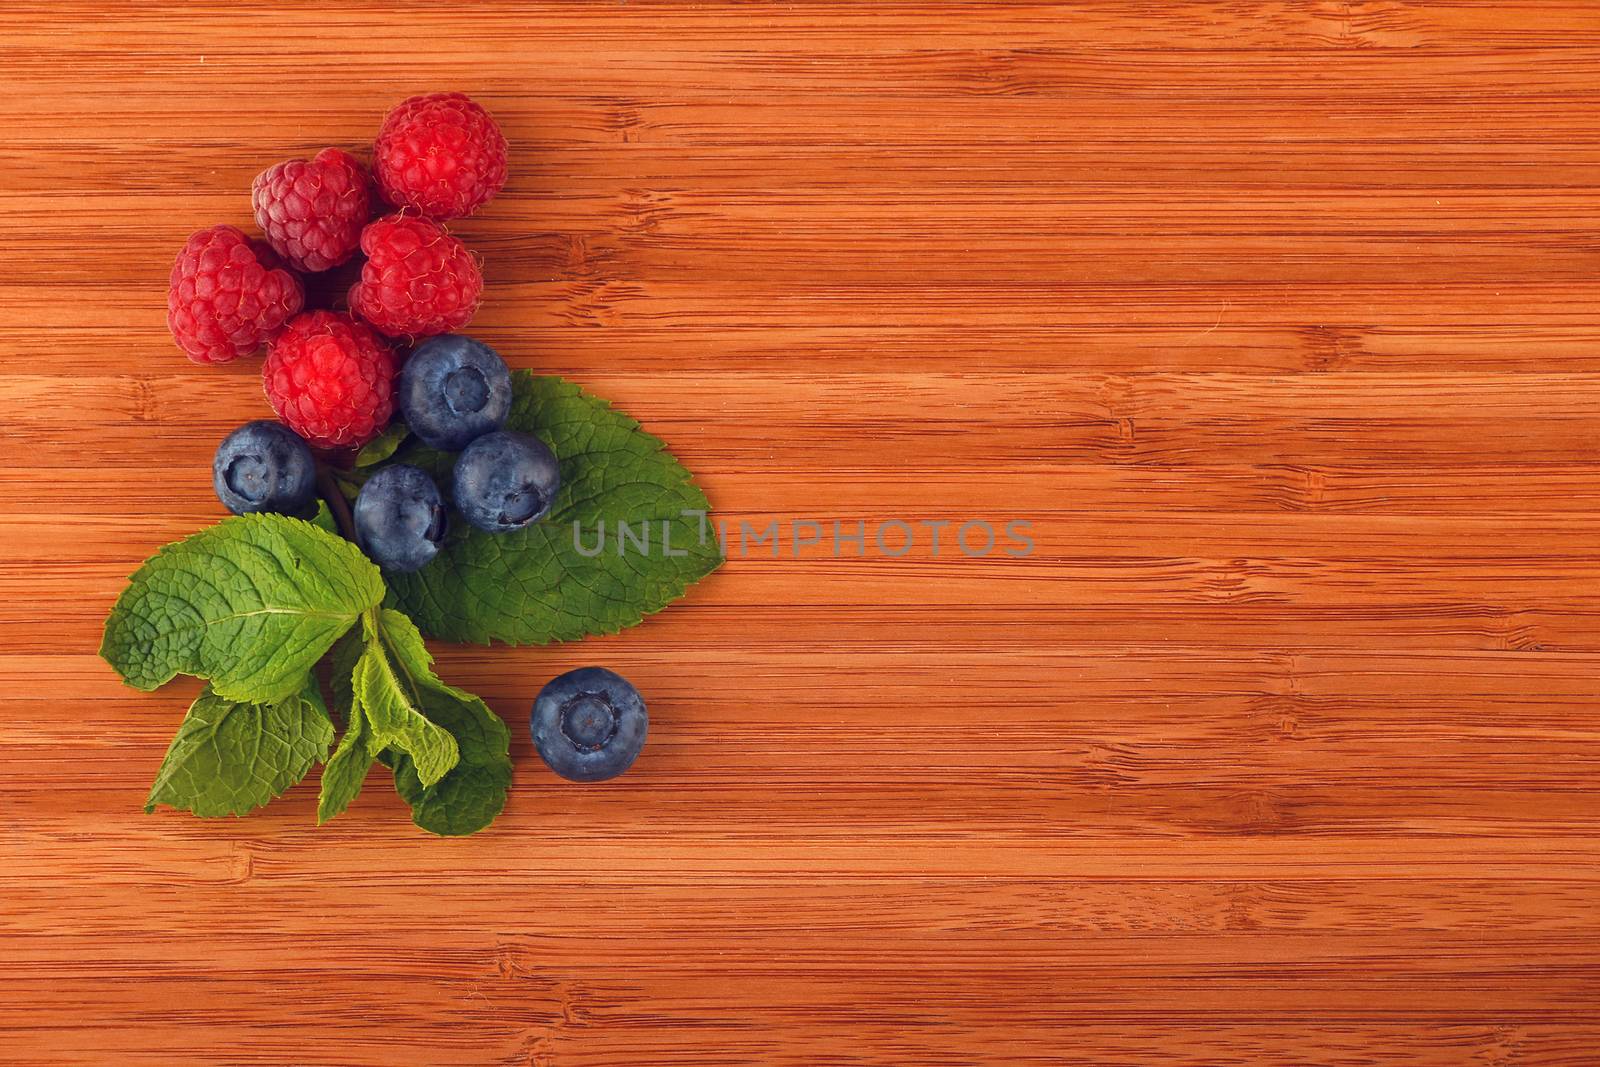 Cutting board with blueberries, raspberries and mint leaves by BreakingTheWalls